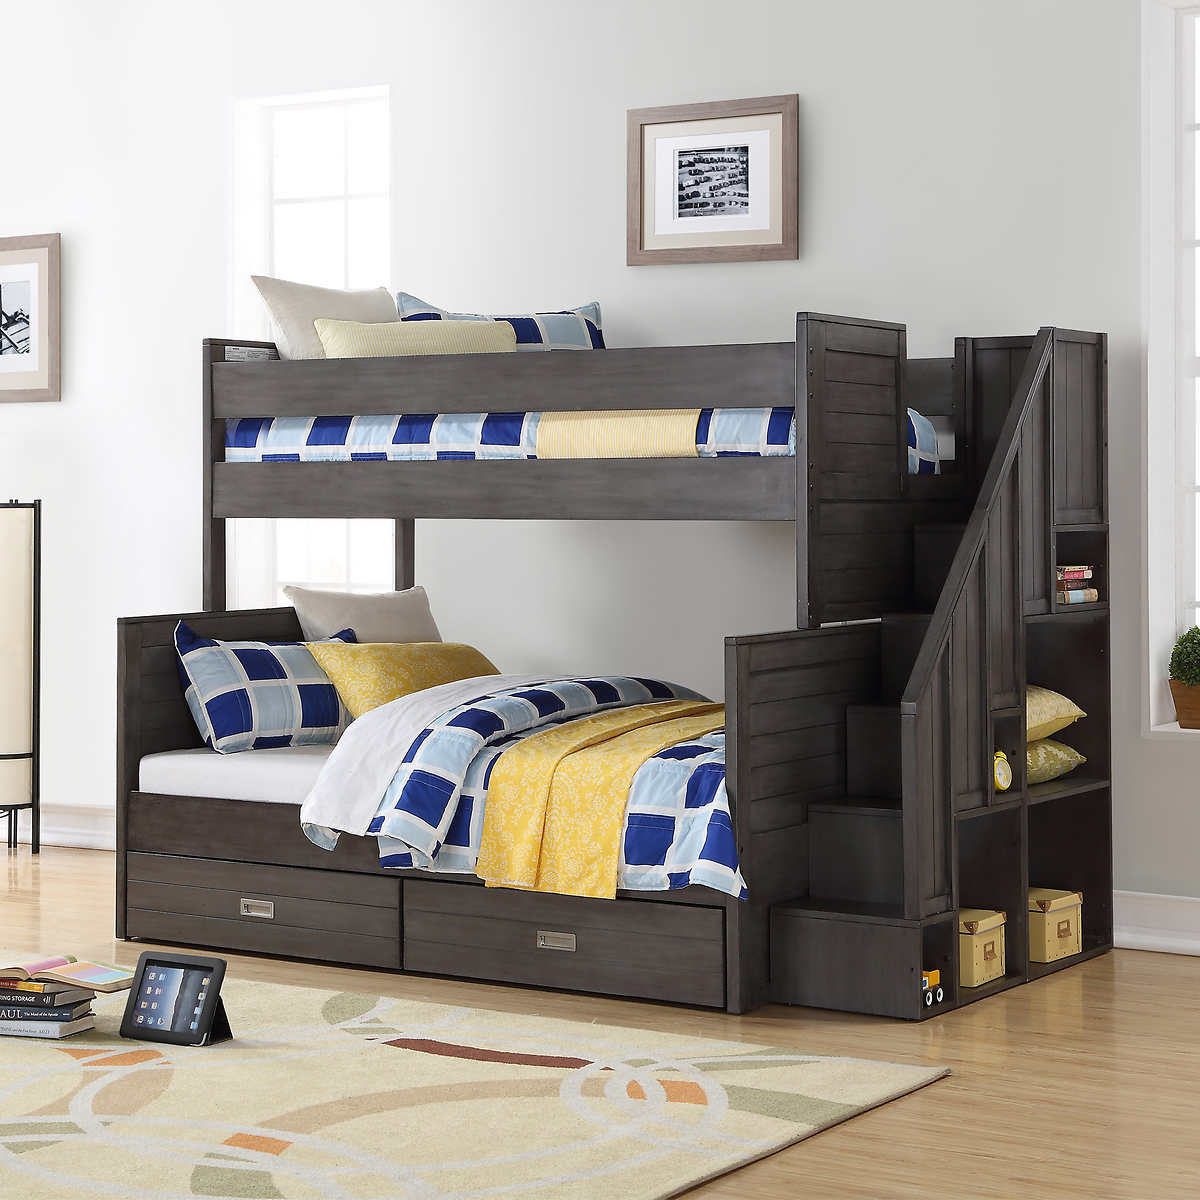 Dylan Twin Over Double Bunk Bed Costco, How To Make A Double Size Bunk Bed